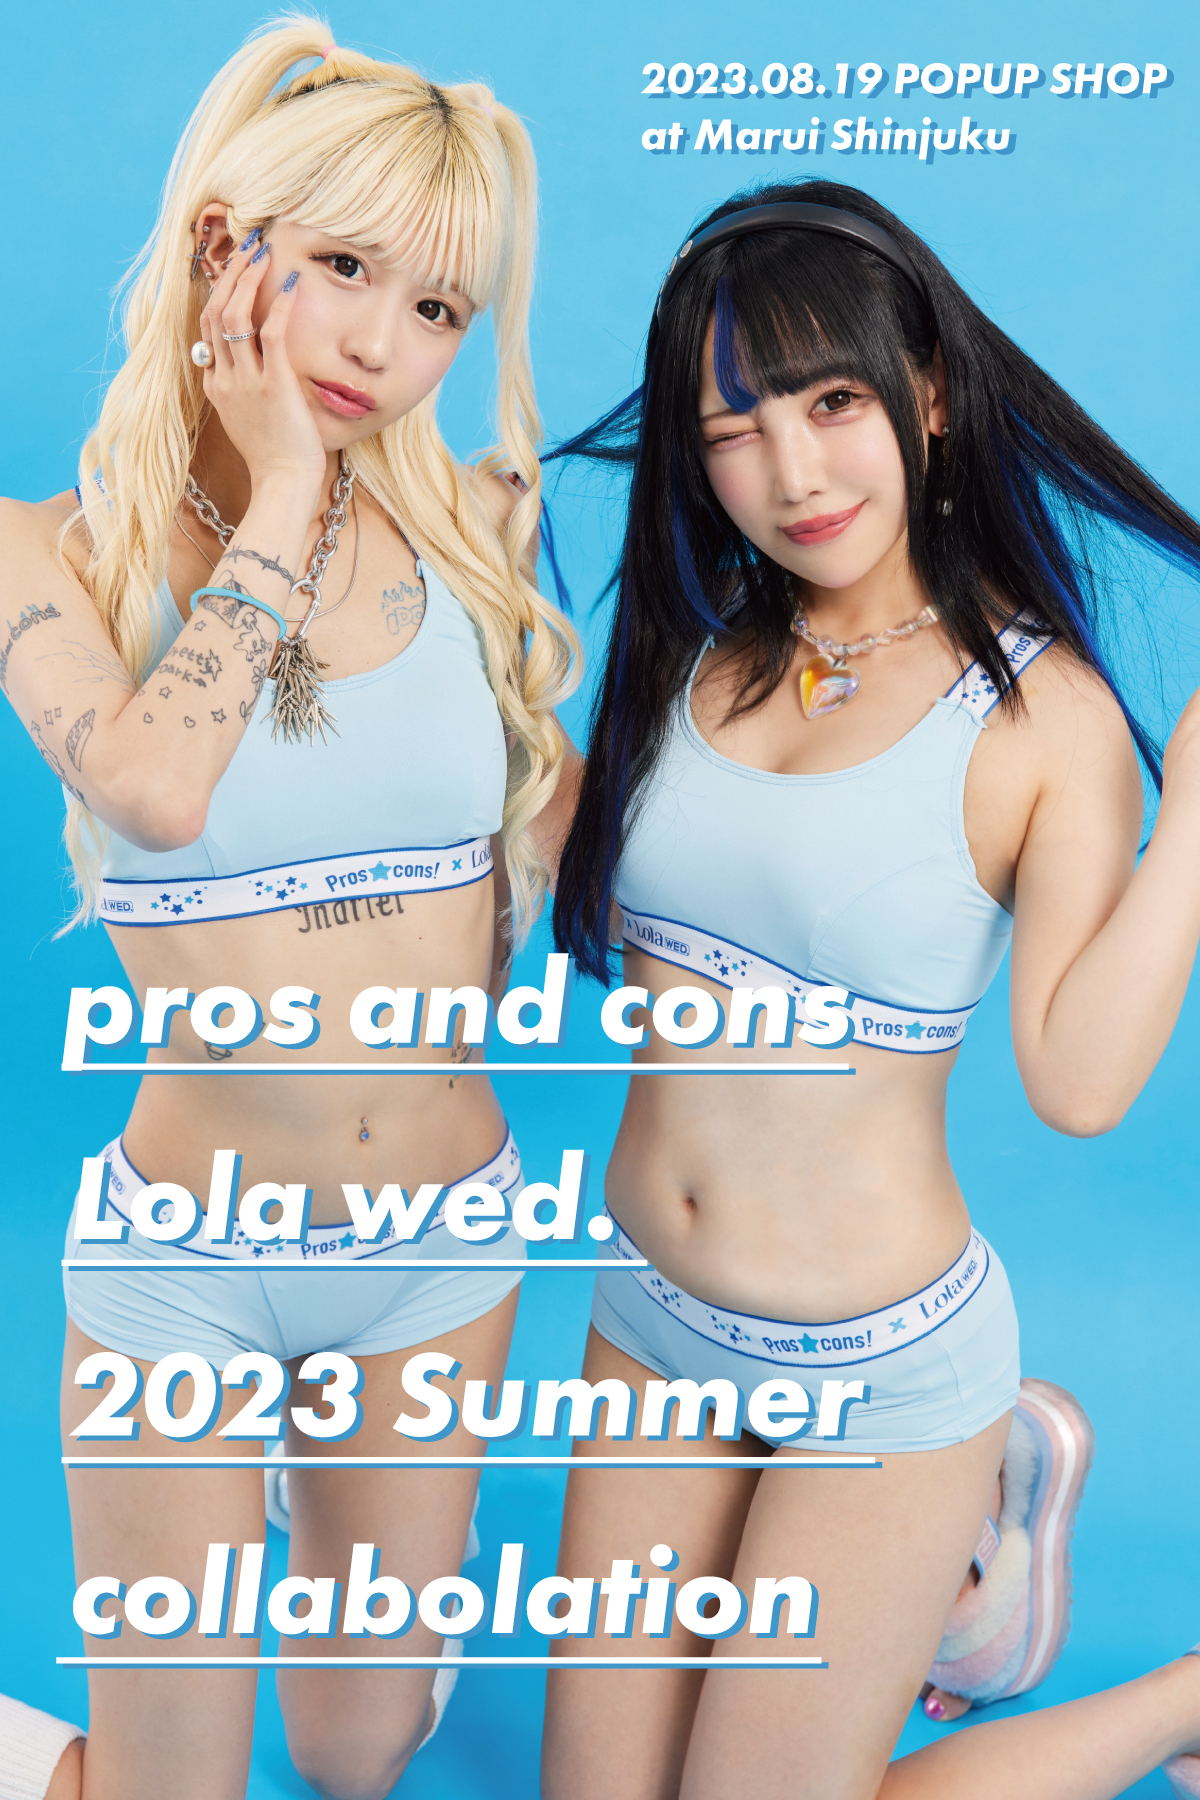 Lola wed. x pros and cons アイテム＆POPUP詳細を公開！